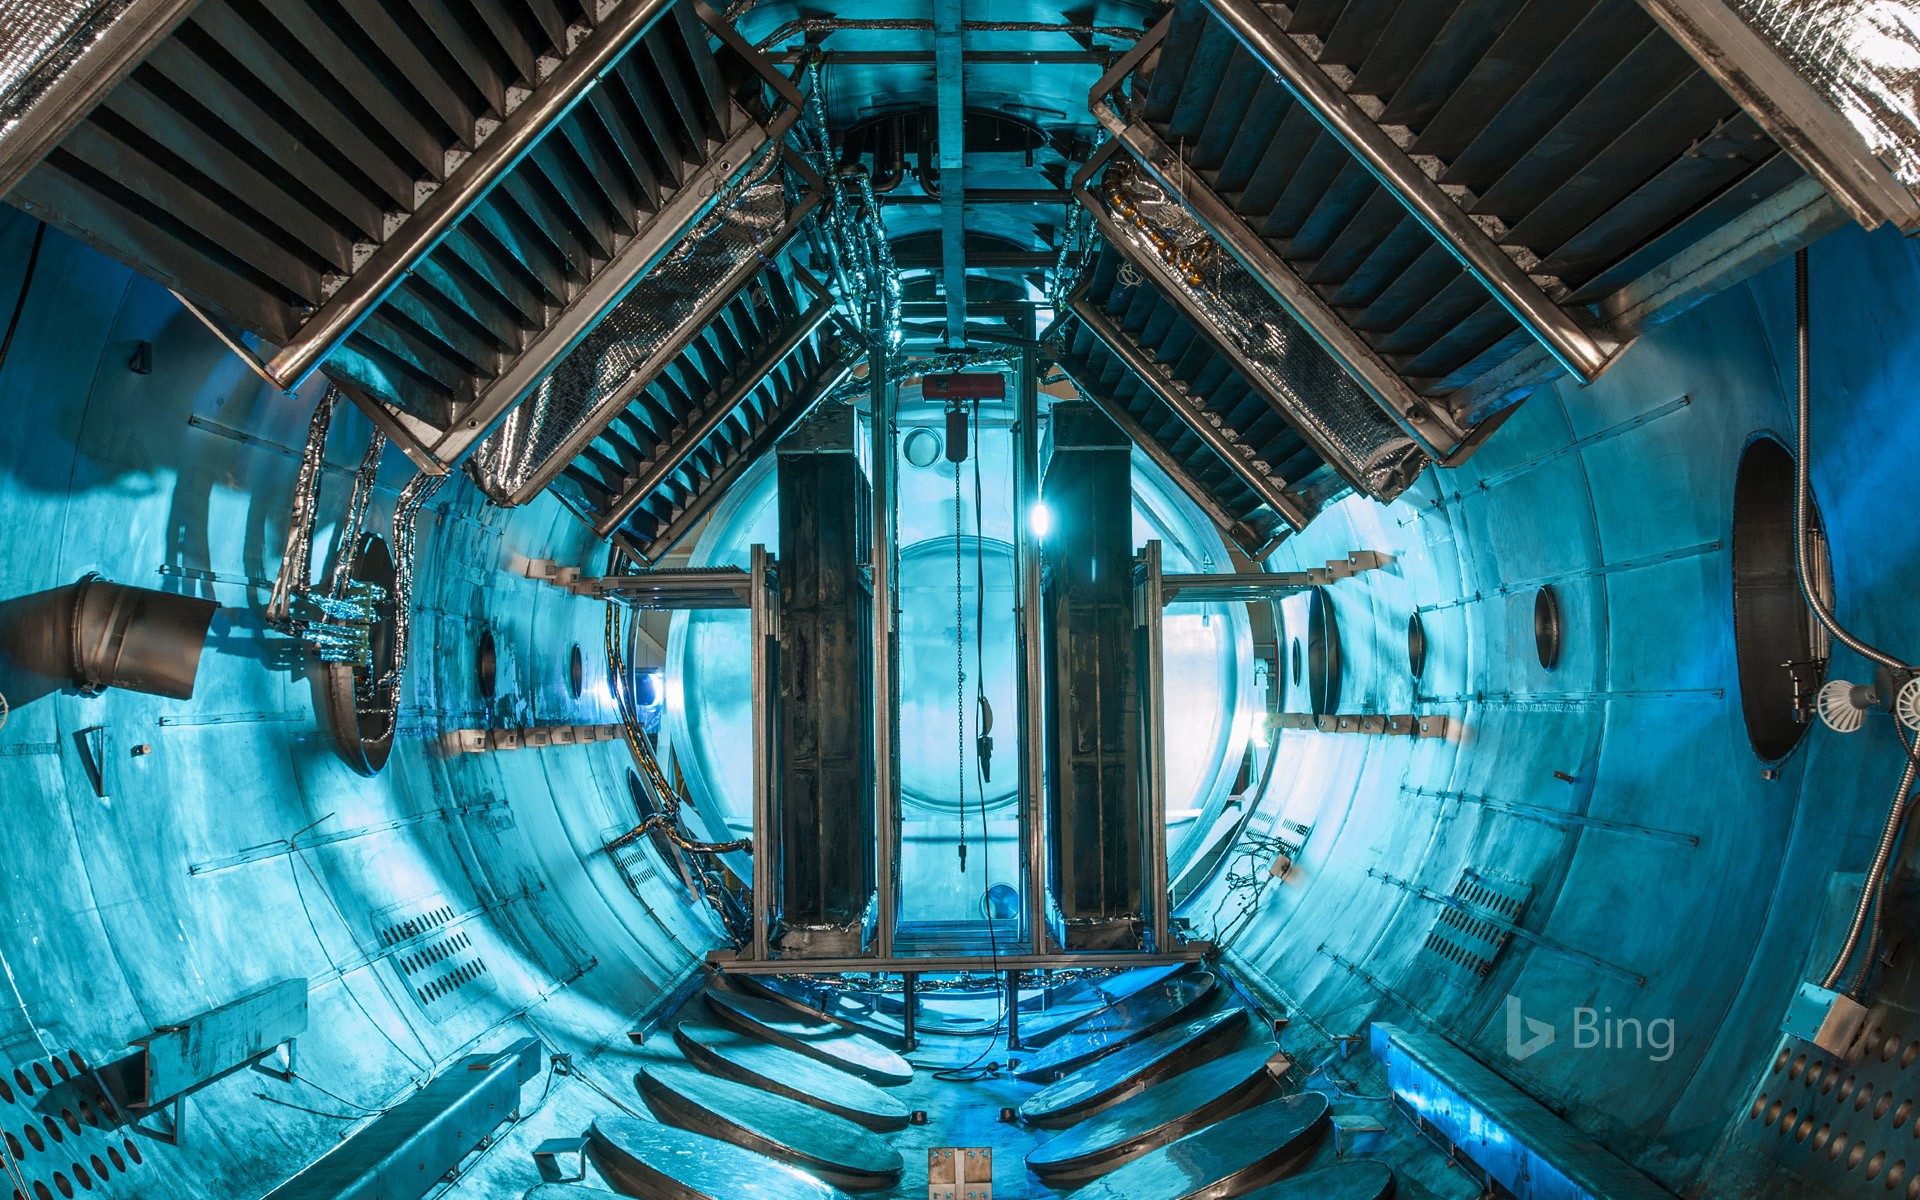 A vacuum chamber at NASA Glenn Research Center in Cleveland, Ohio